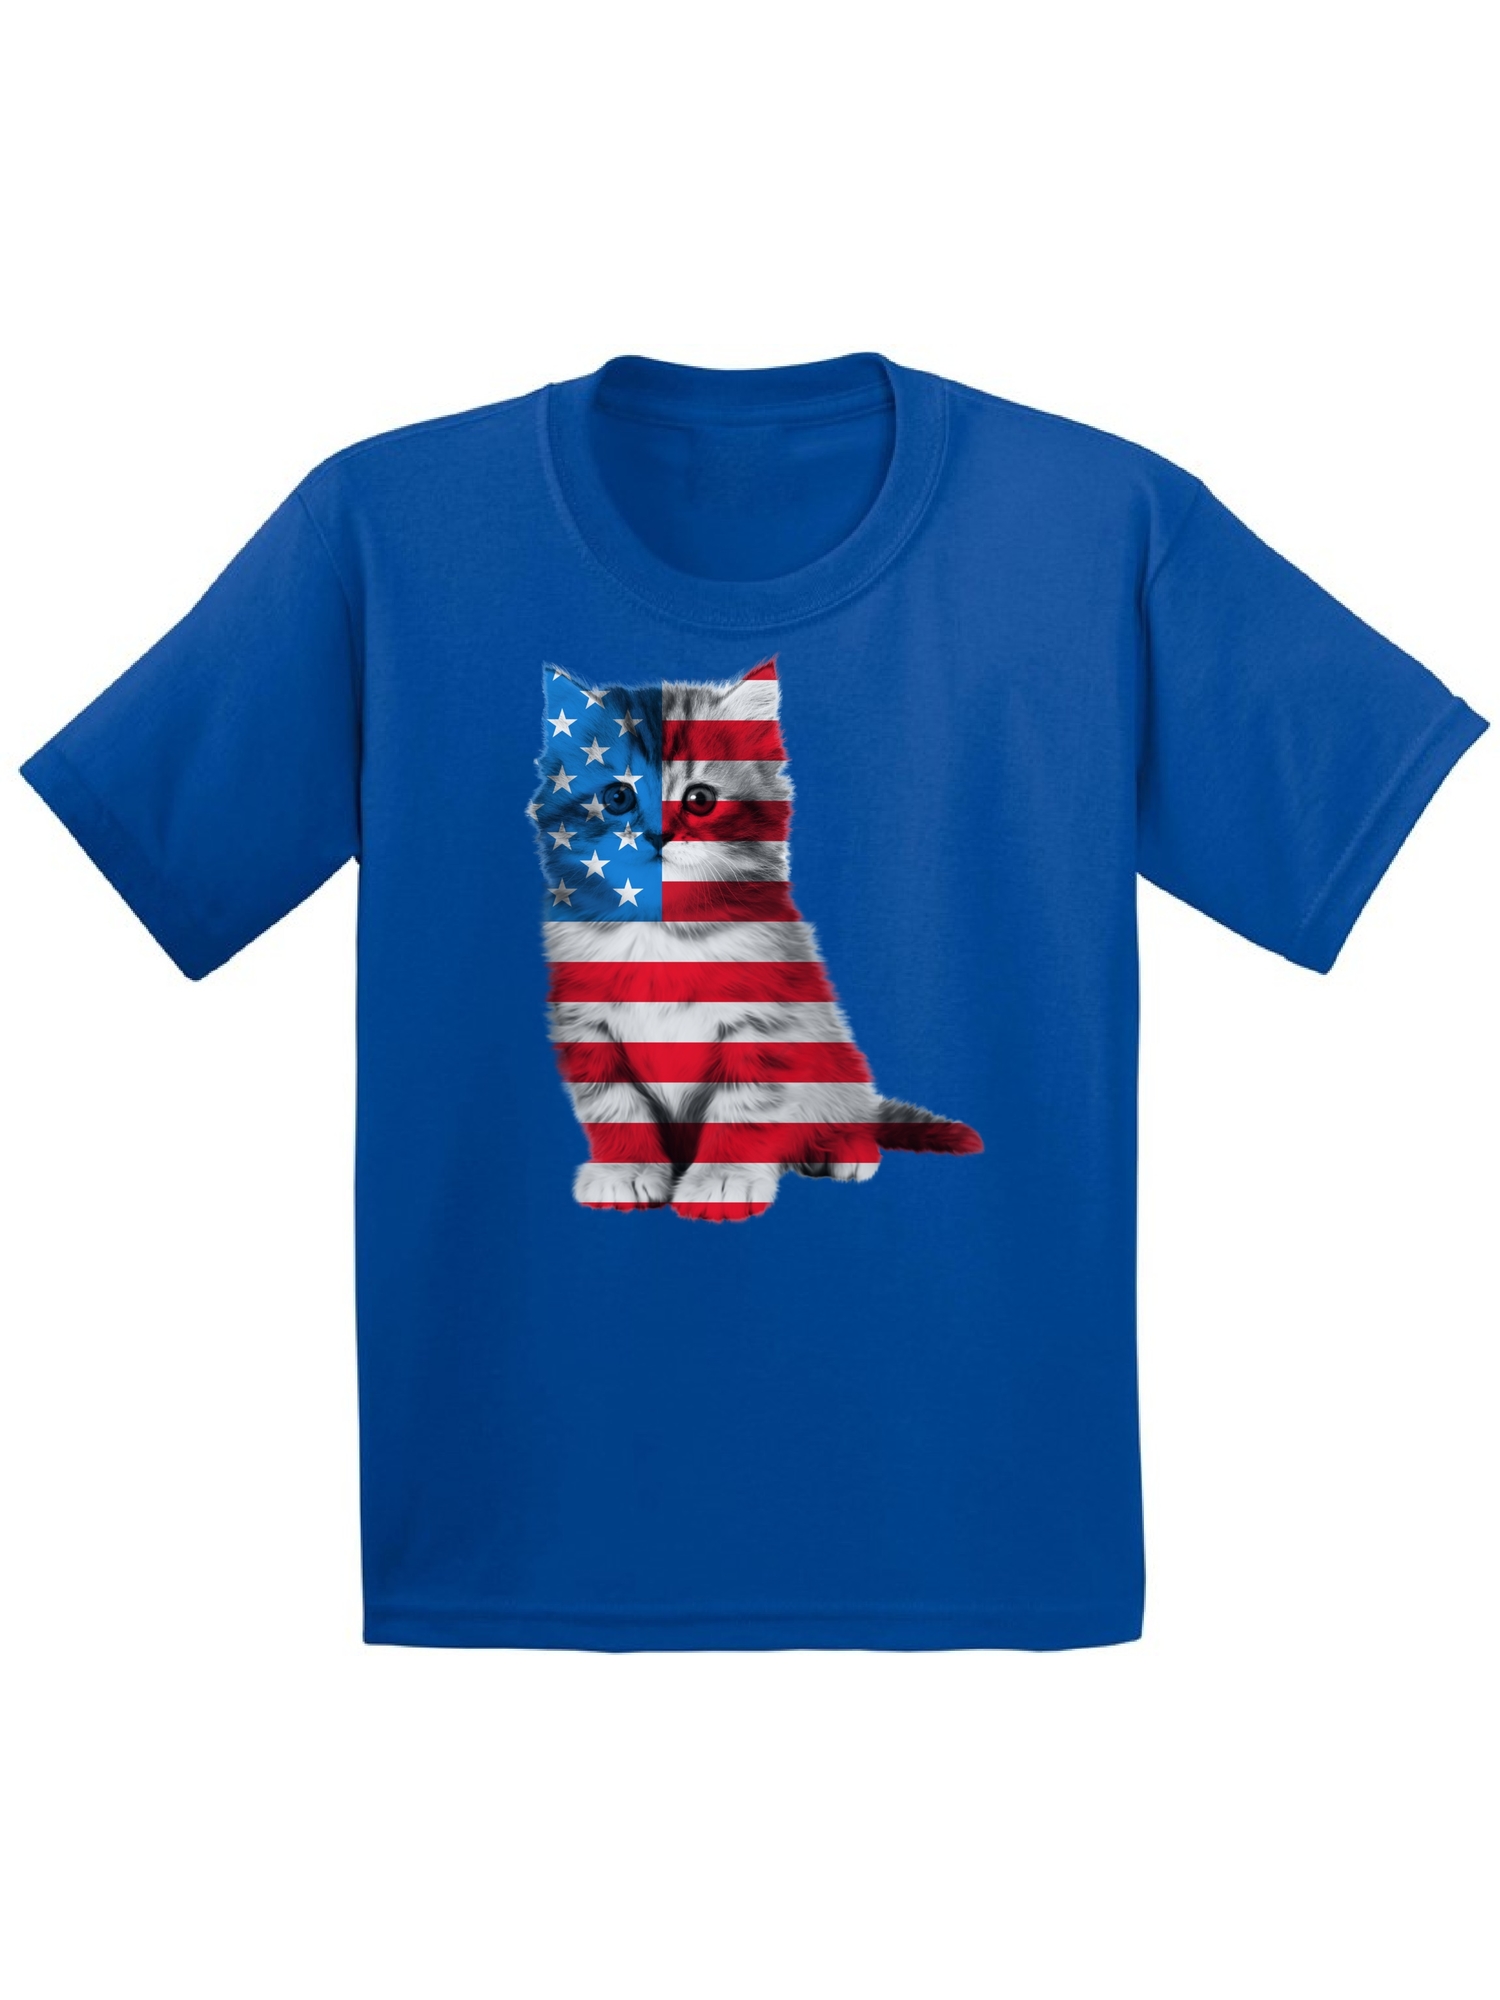 Awkward Styles American Flag Cute Cat Youth Shirt Made in the USA 4th of July Cat T shirt for Boys USA Pride 4th of July Cat T shirt for Girls Stripes and Stars Cute USA Cat Kids Tshirt Cat Lovers - image 1 of 4